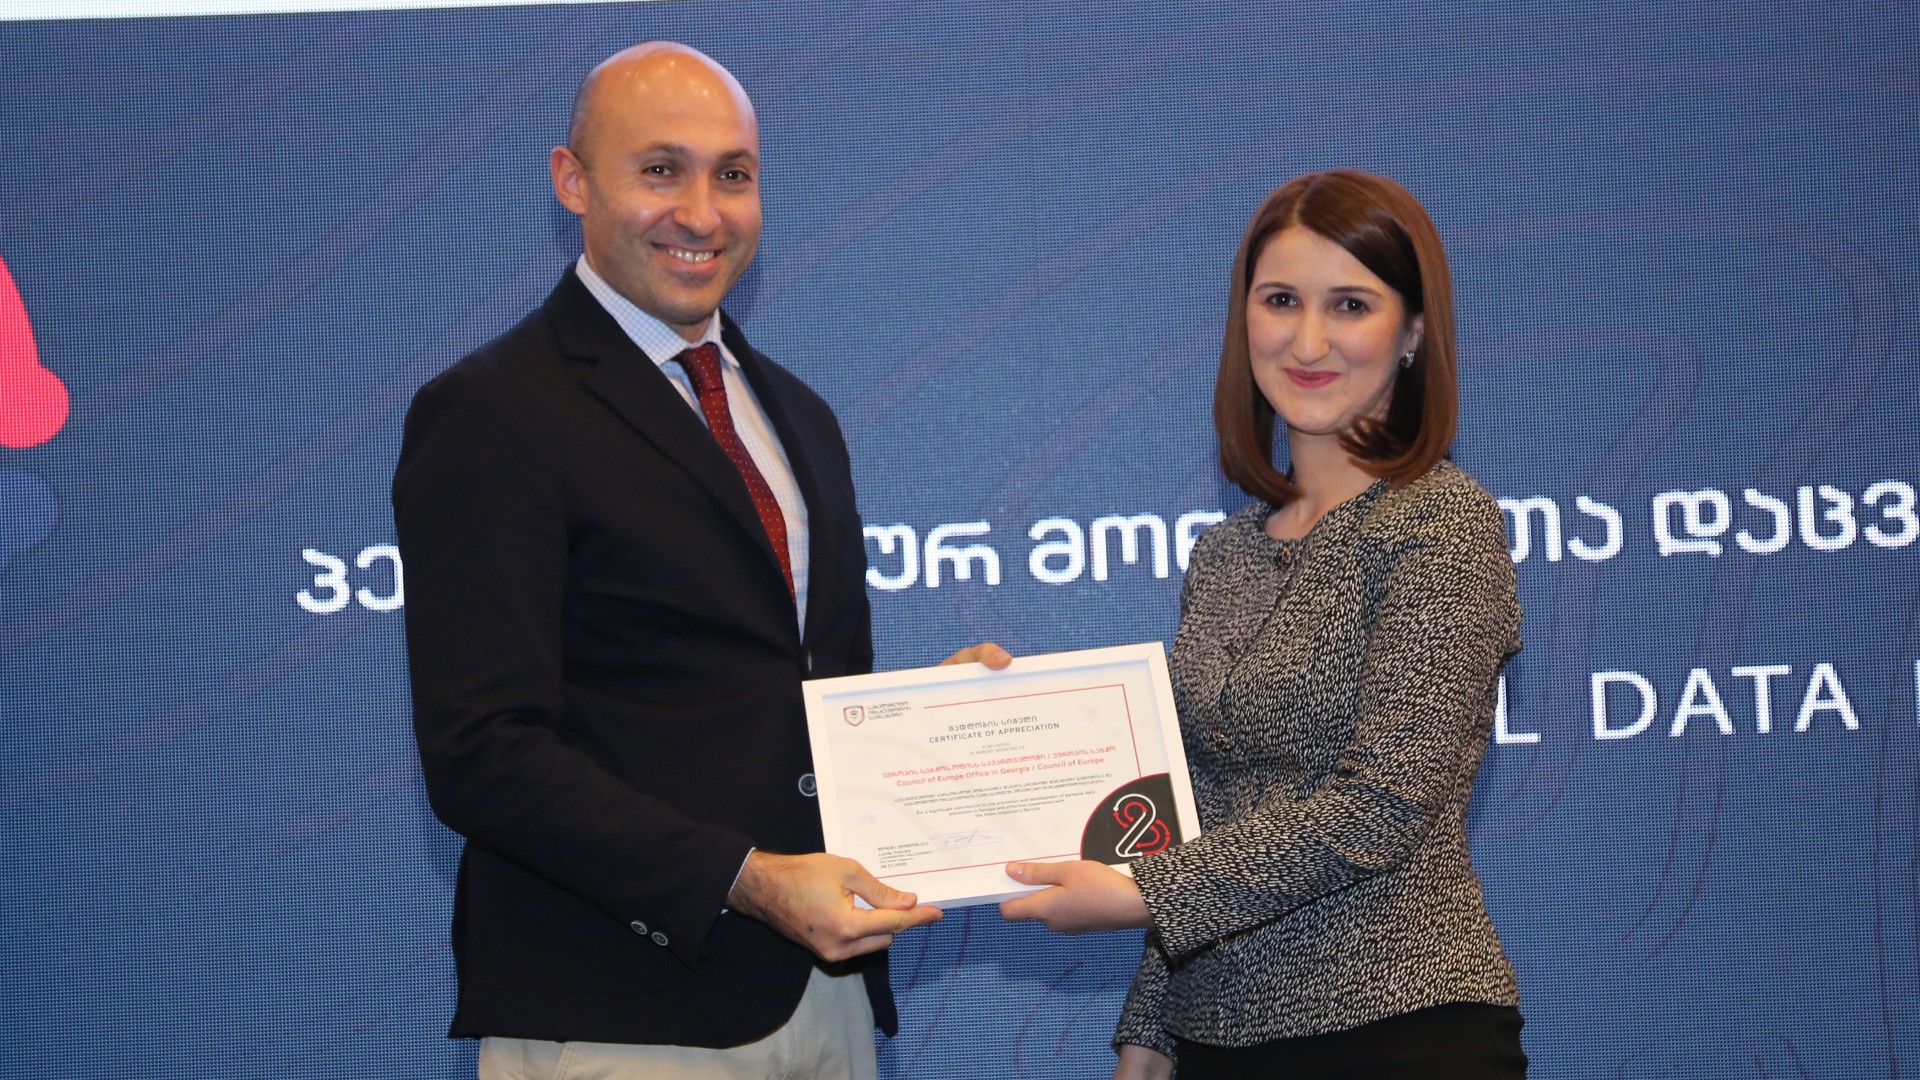 Council of Europe Offie in Georgia awarded with the Certificate of Appreciation for promotion and development of personal data protection